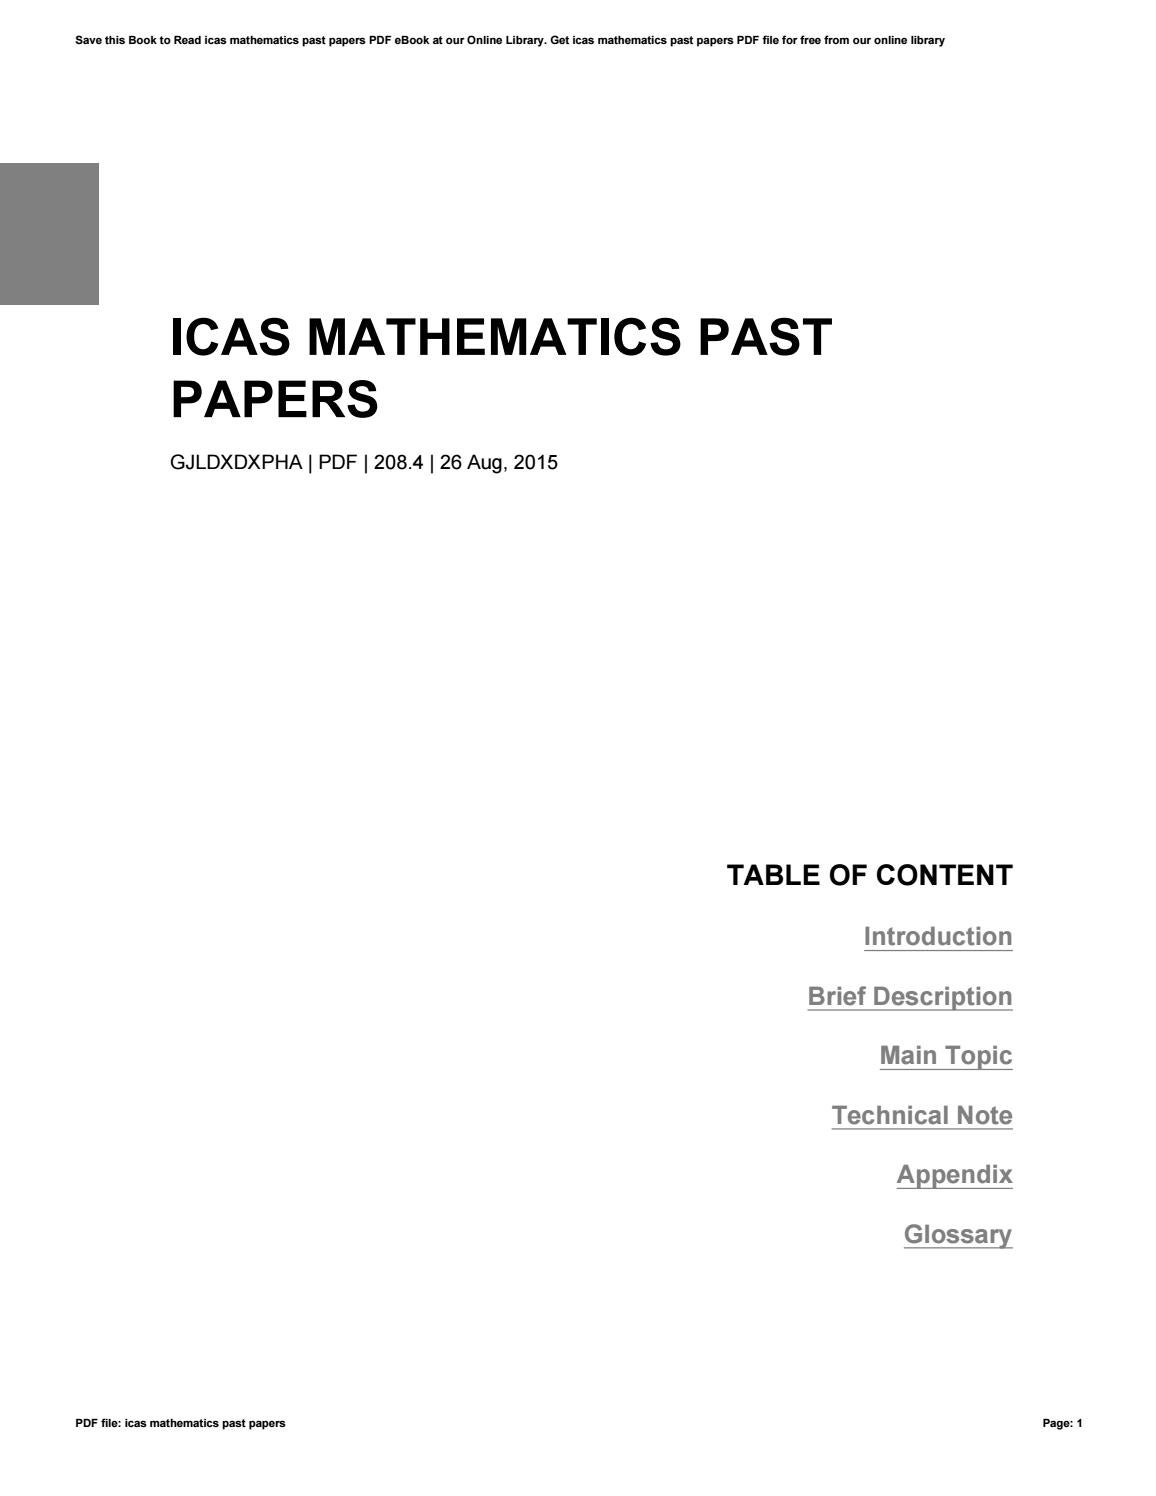 icas past papers pdf download